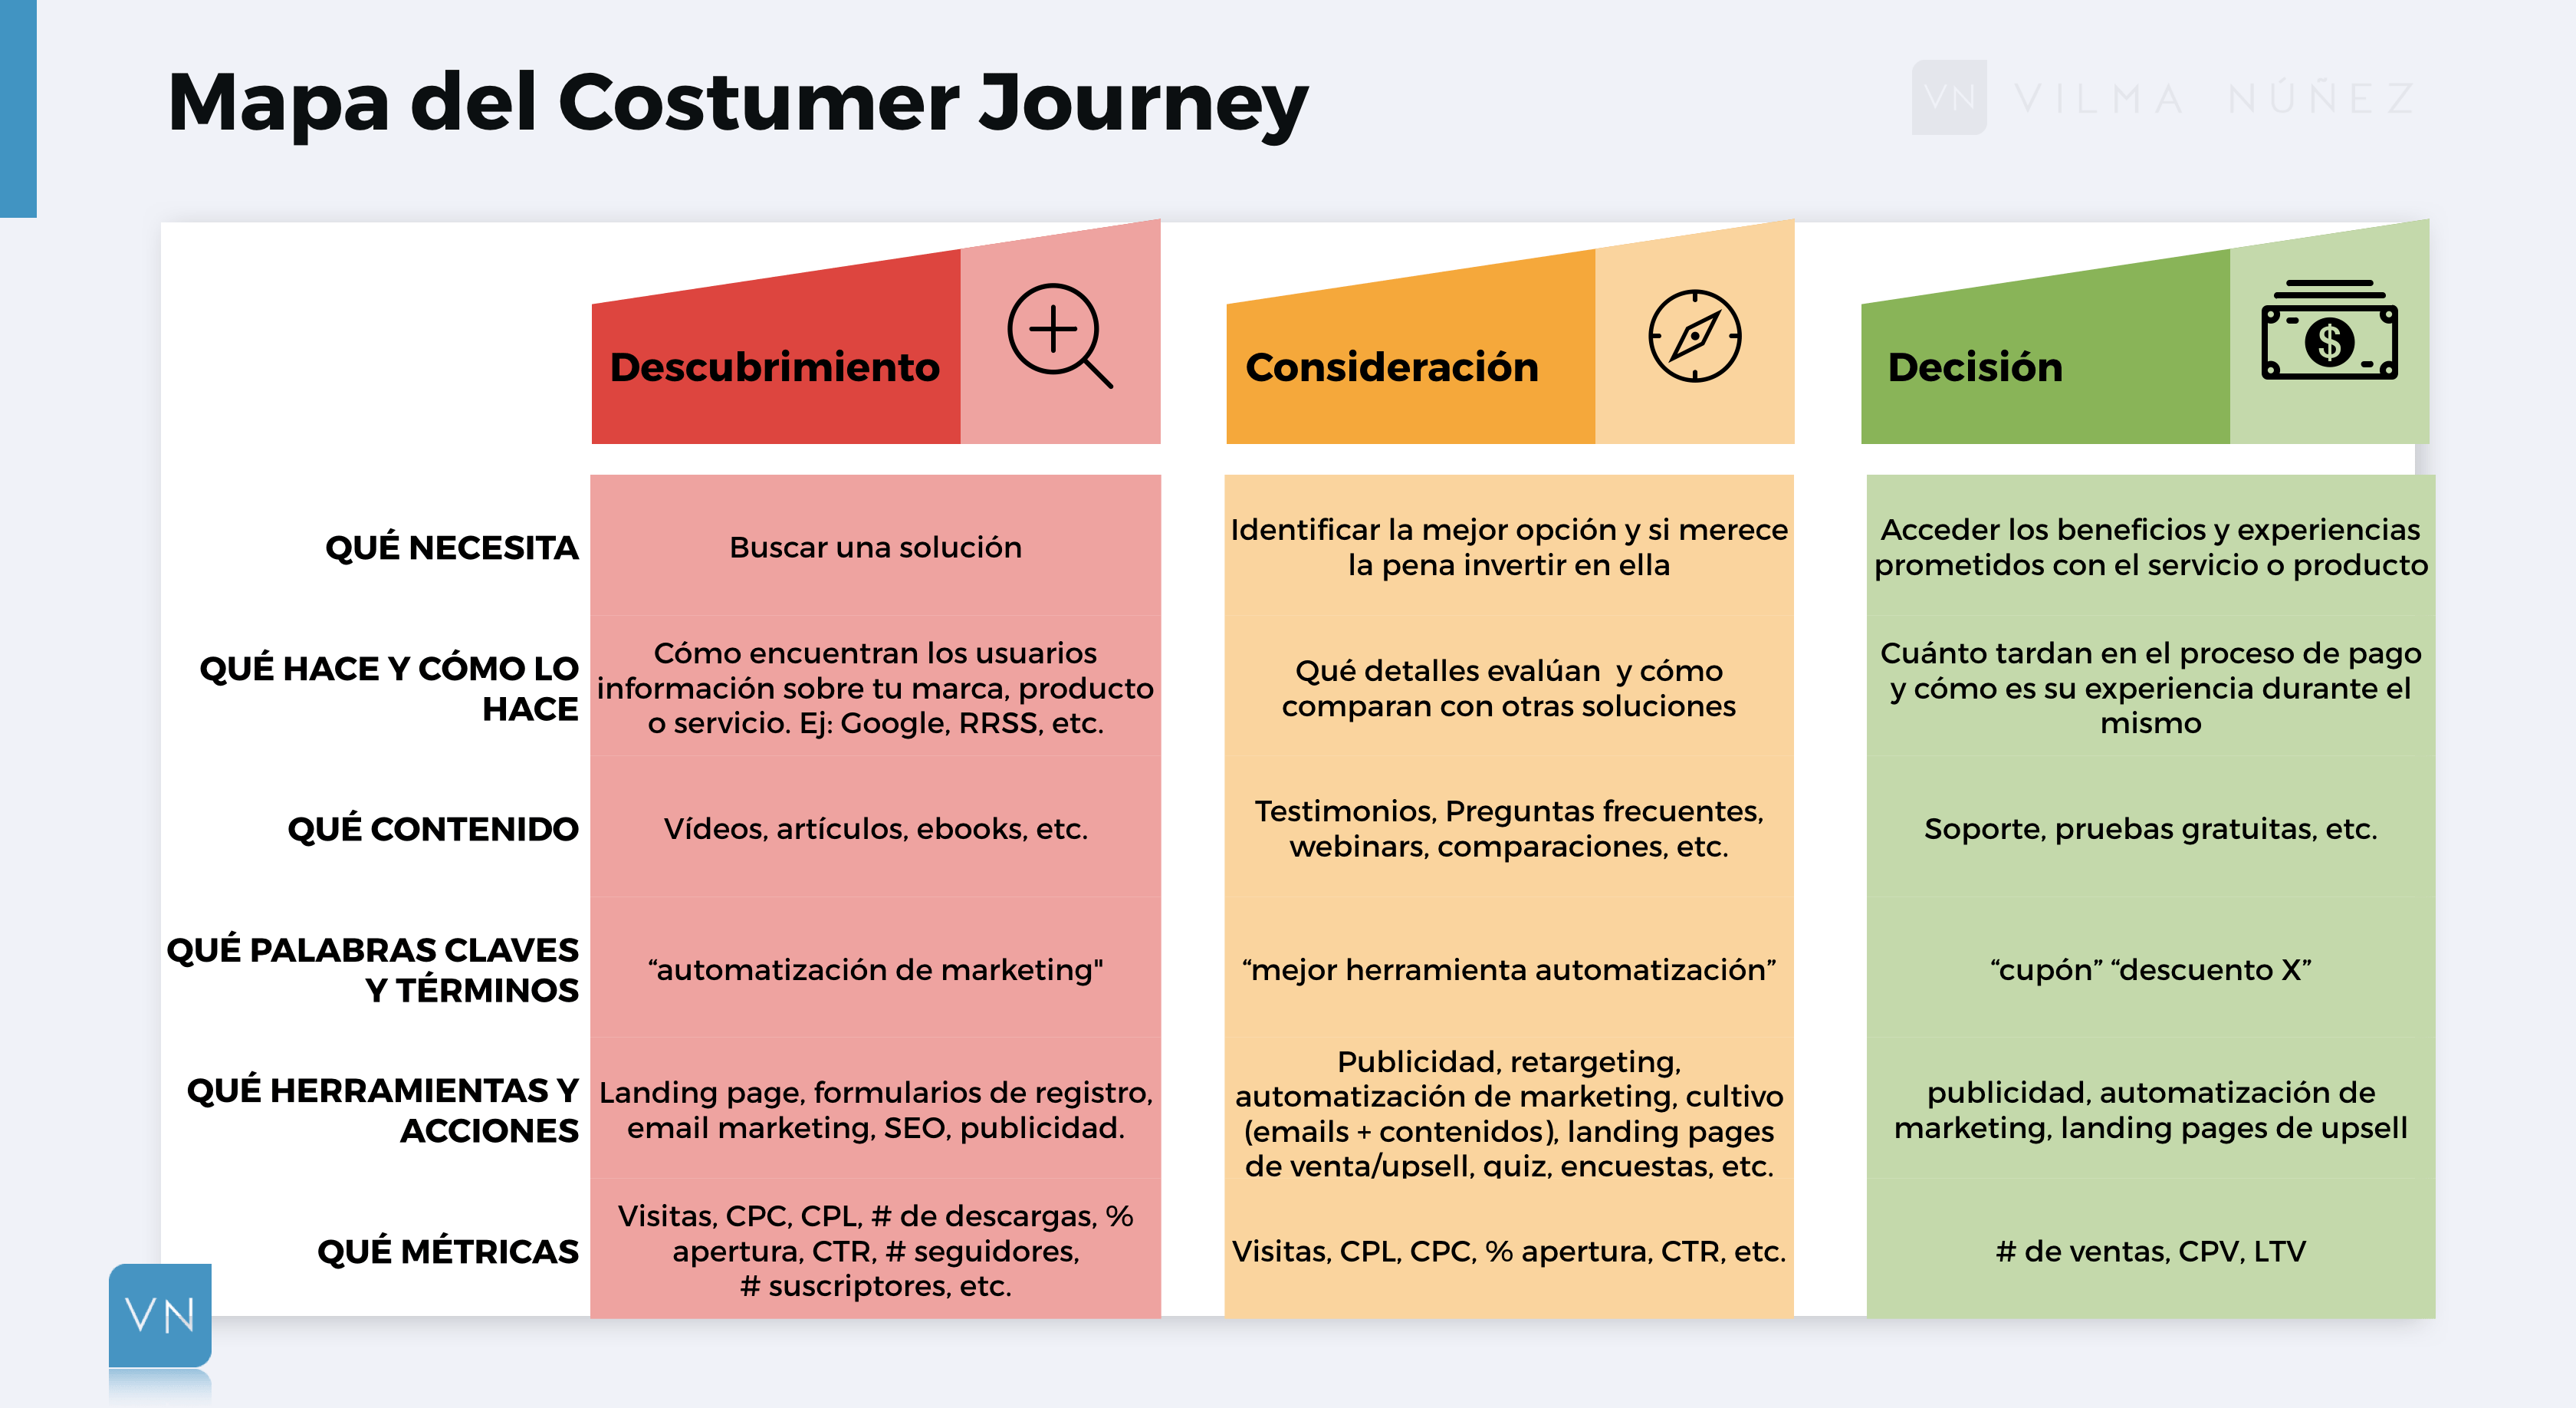 customer journey que significa